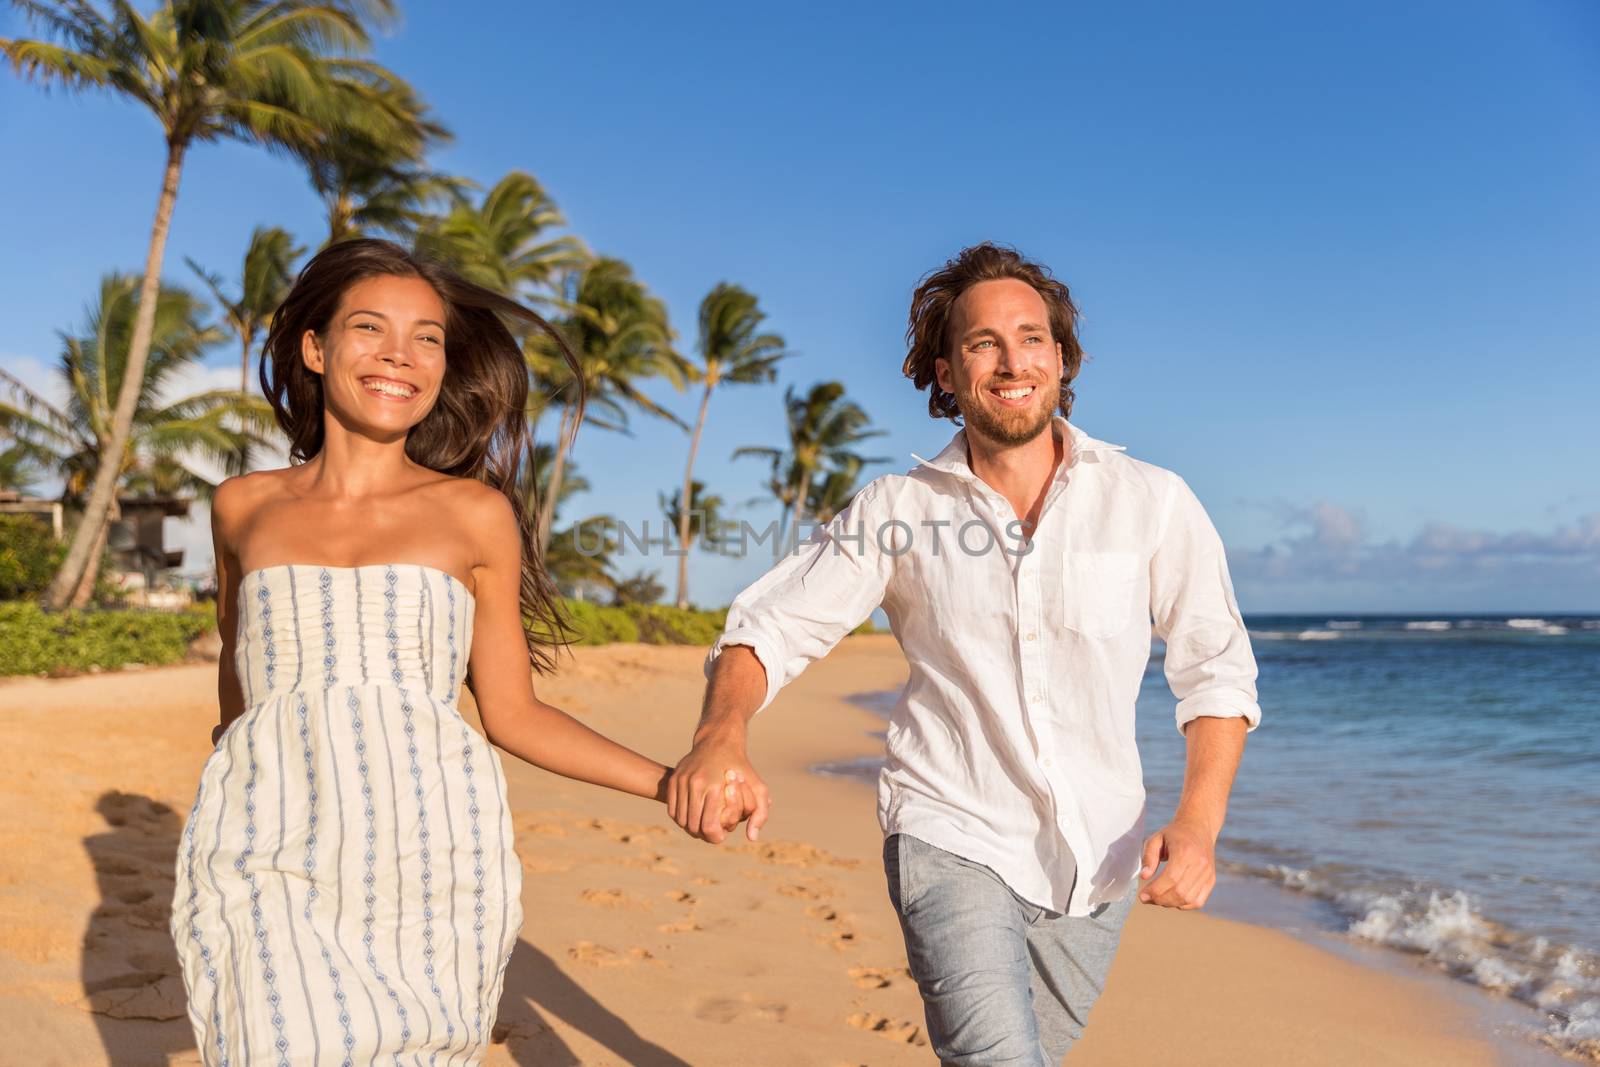 Happy newlyweds couple running on the beach holding hands, honeymoon travel. Asian caucasian multiracial people having fun together.